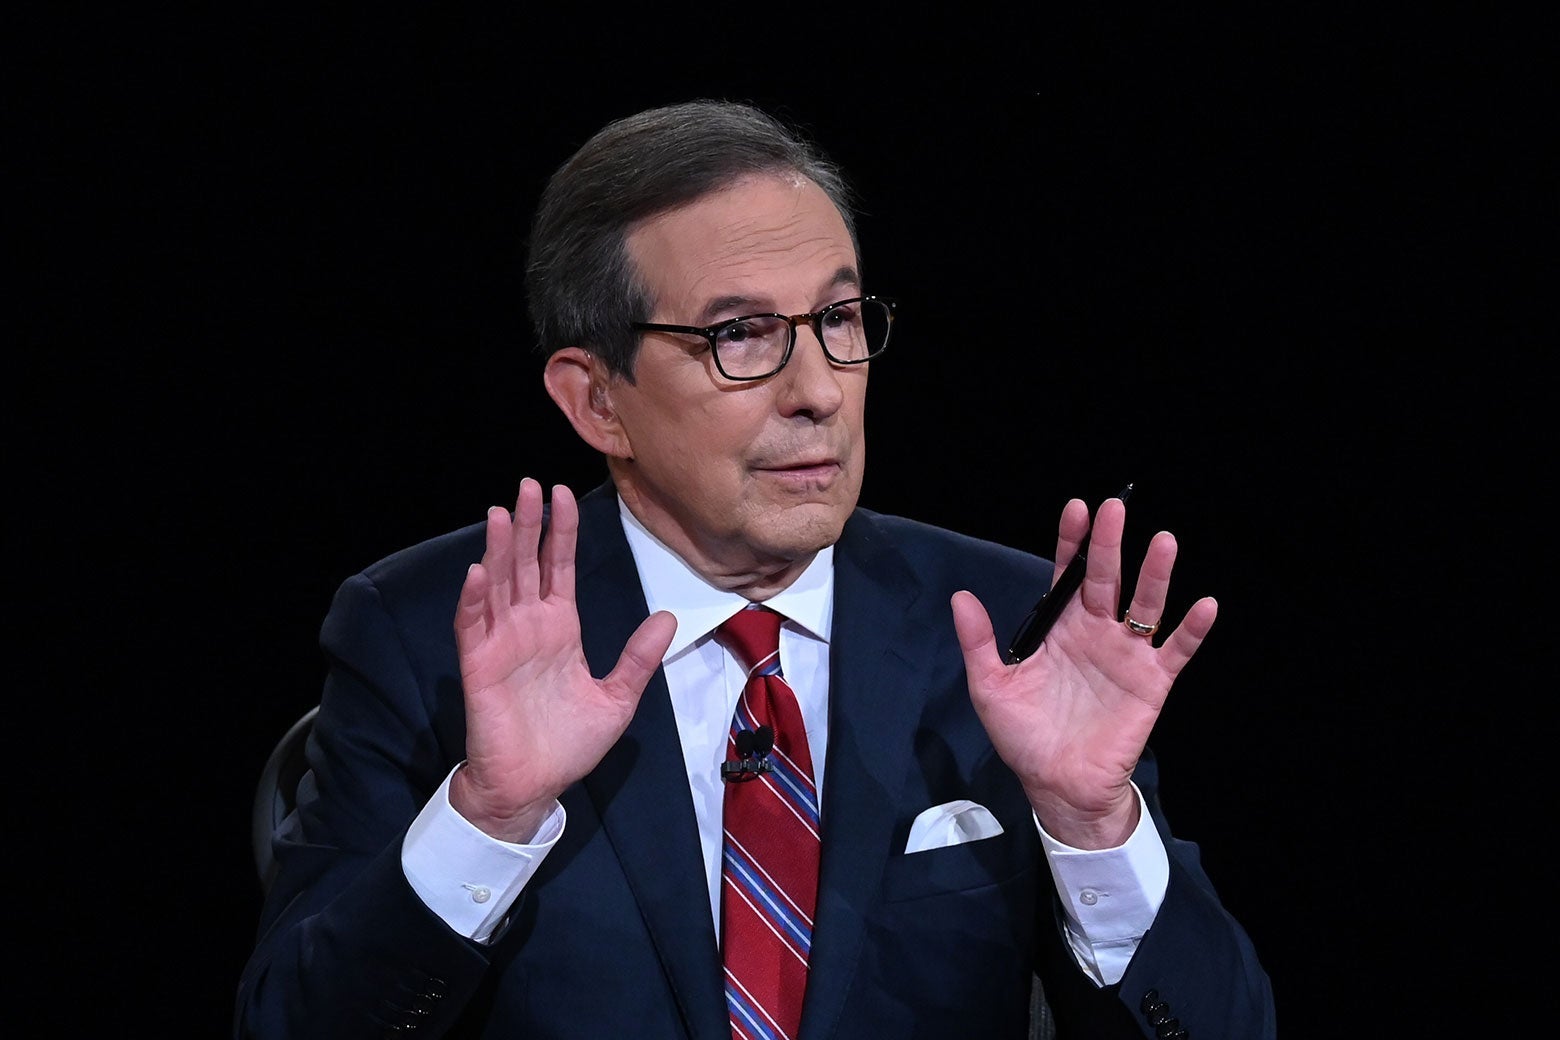 Chris Wallace, wearing black eyeglasses and a navy suit with a red tie, gestures with both hands palm-out, a pen tucked in his right fingers.